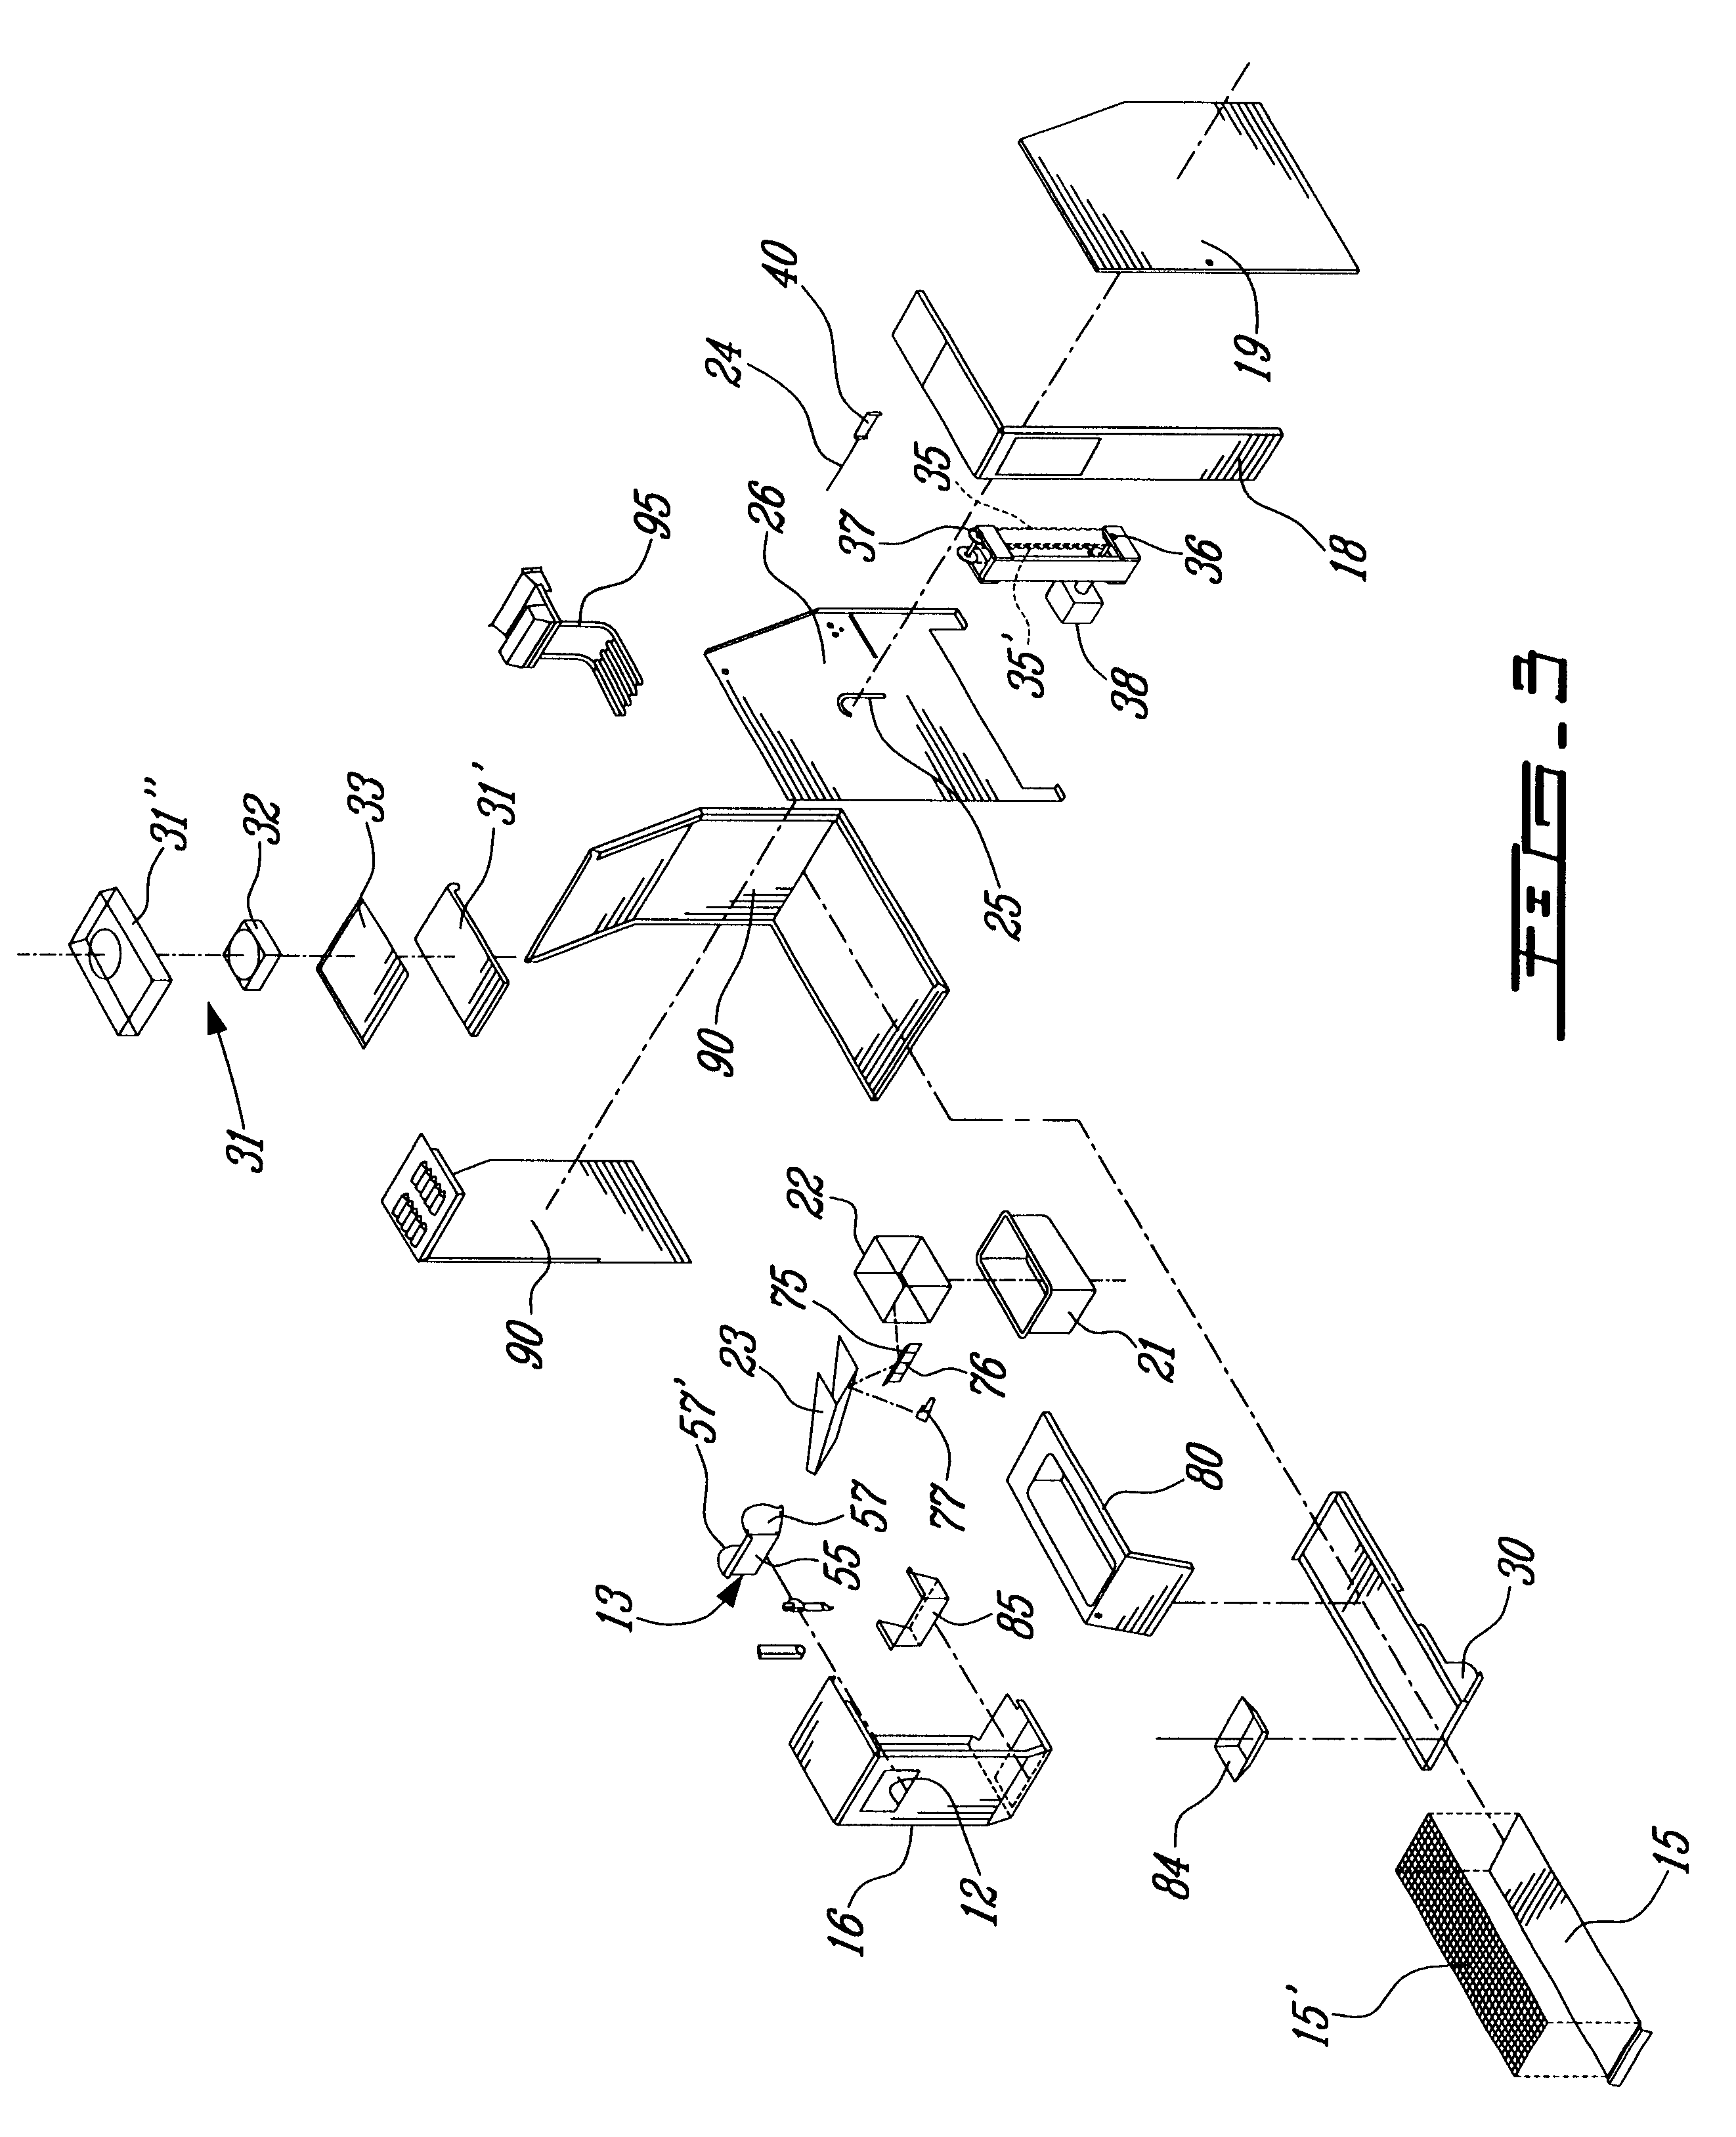 Apparatus for automatically frying foodstuff